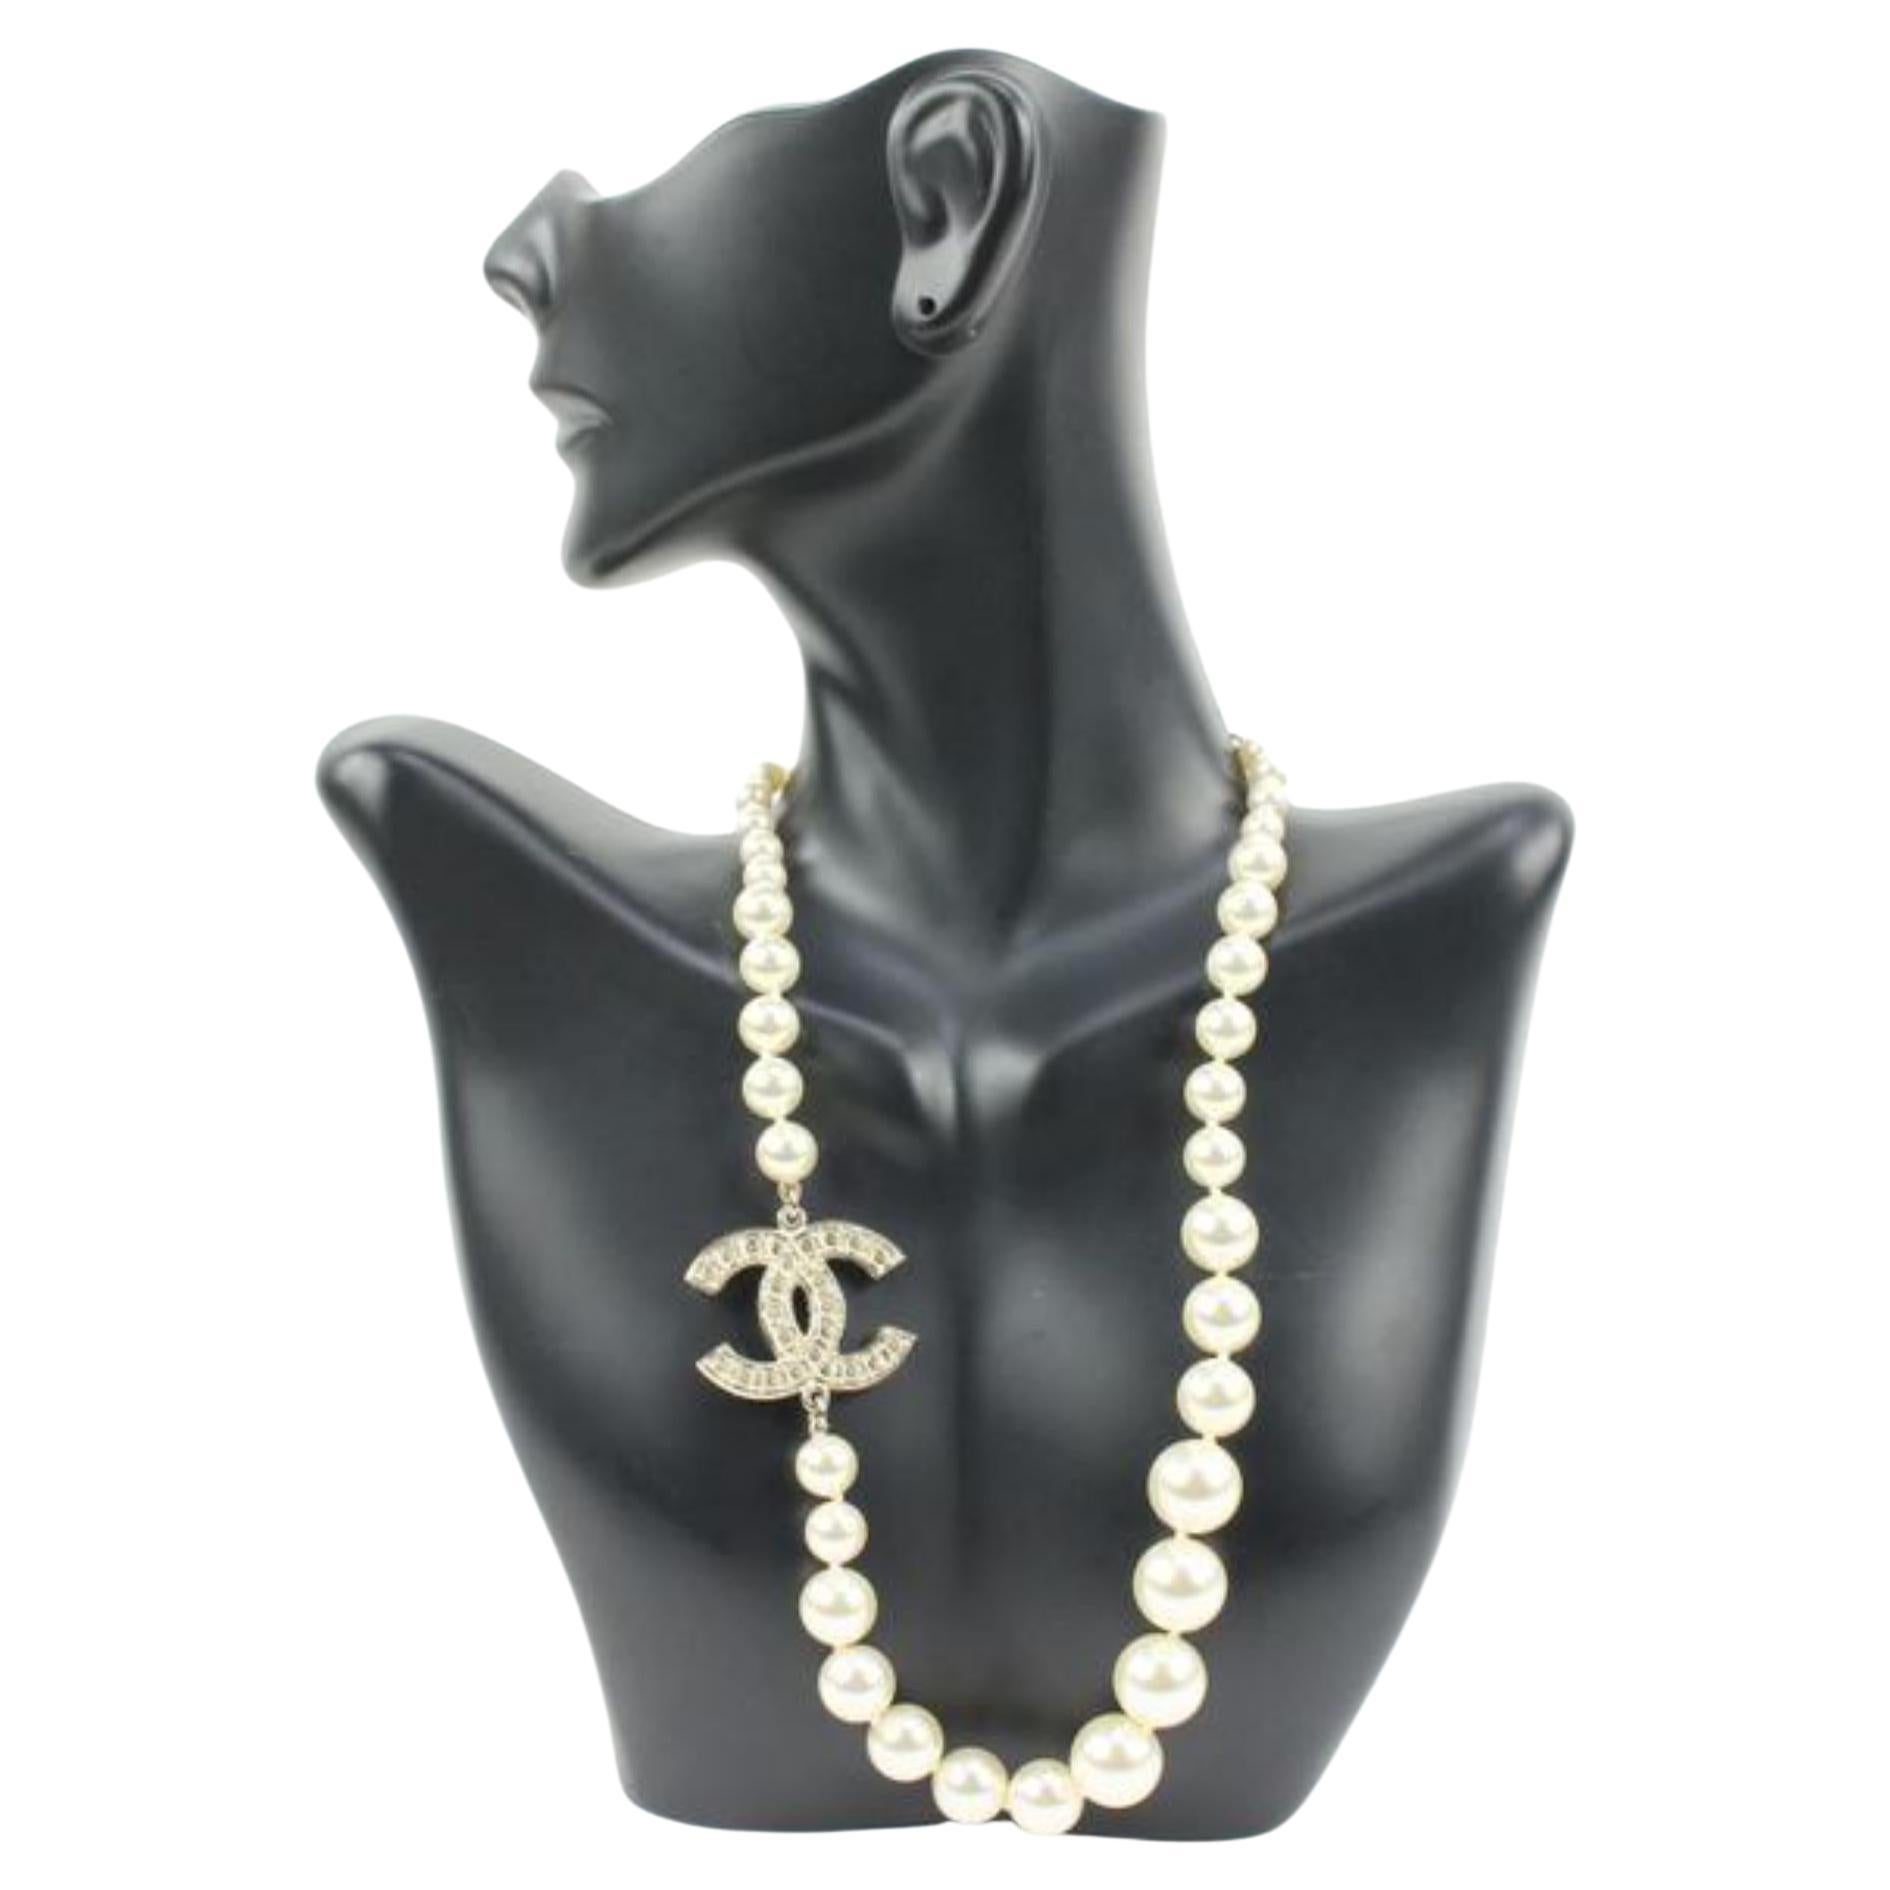 NEW CHANEL NECKLACE LOGO CC TWO-TONE PEARLS 2022 PERALS NECKLACE